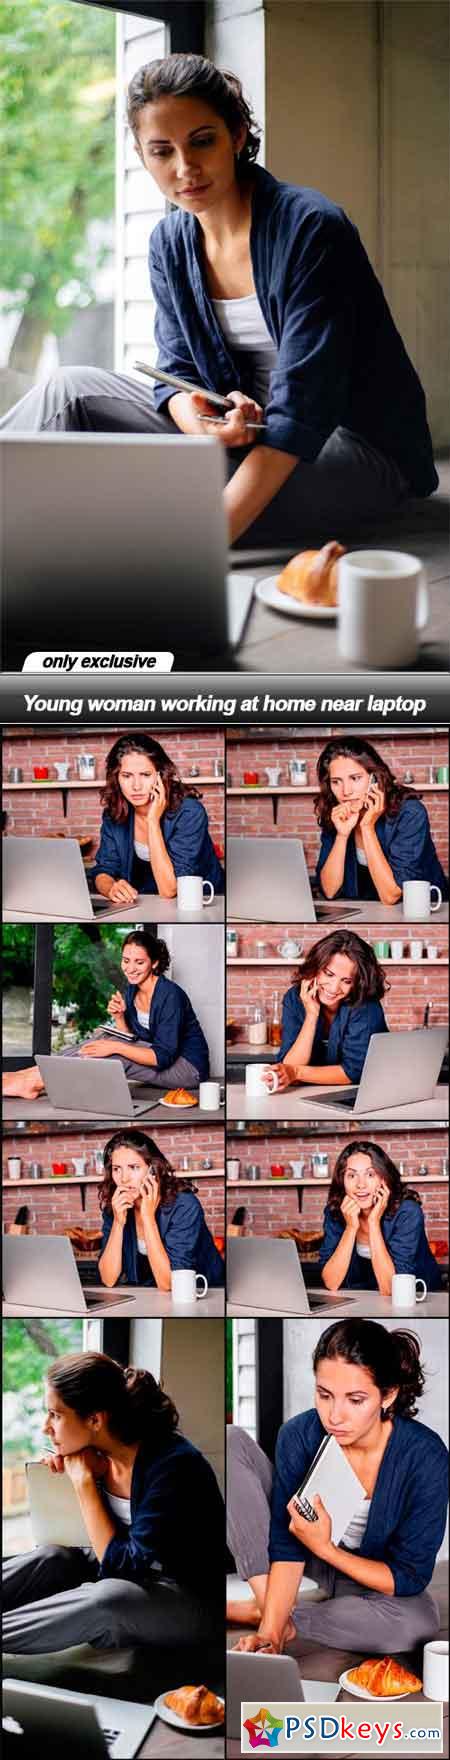 Young woman working at home near laptop - 9 UHQ JPEG